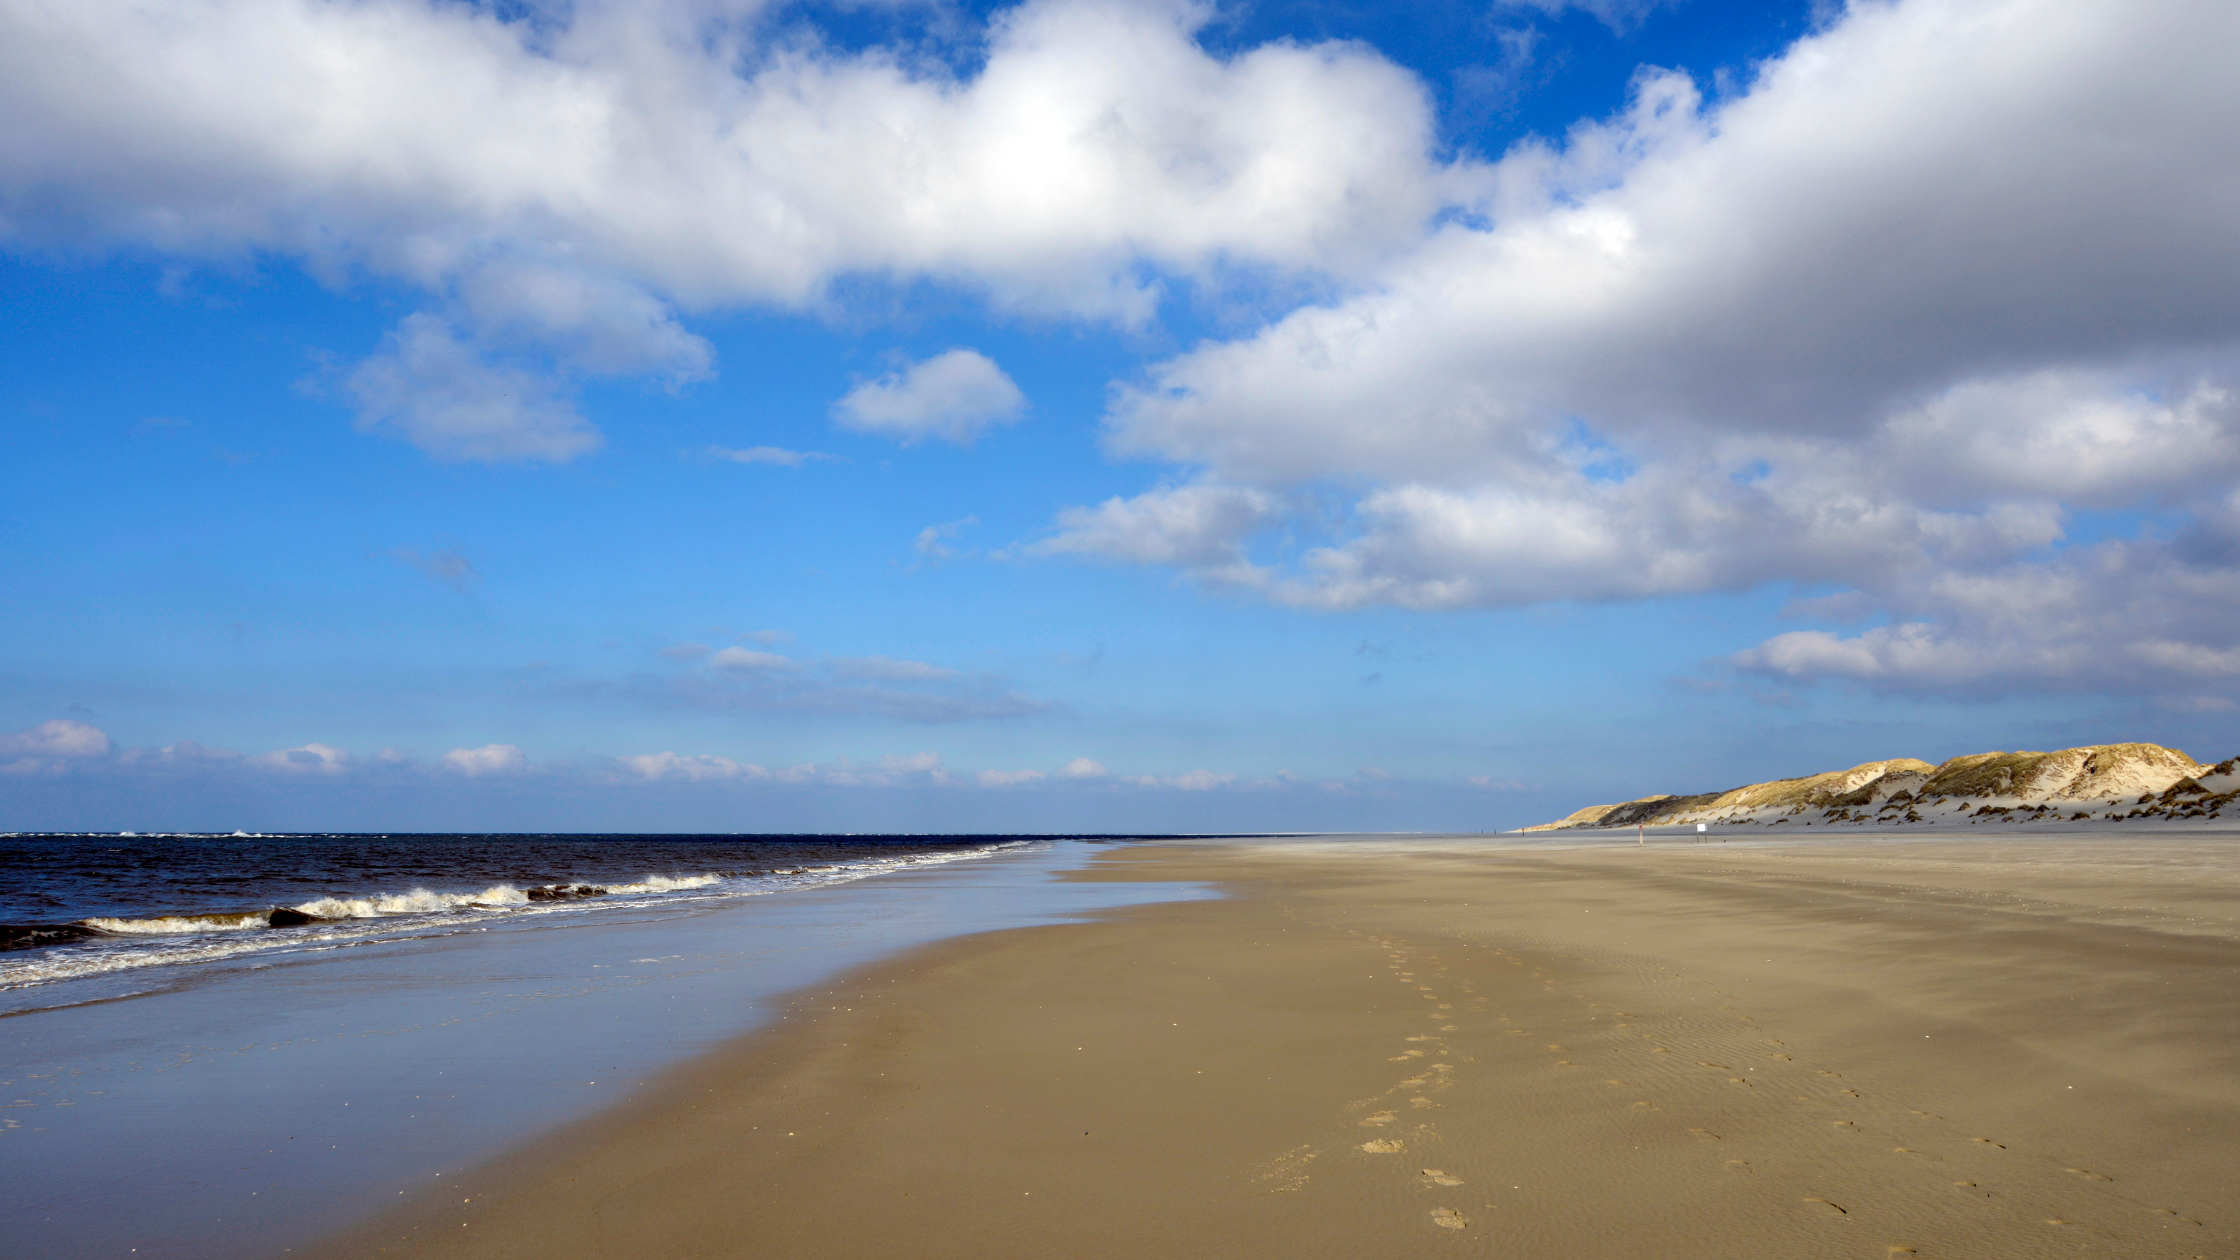 The particularly authentic beach of Terschelling